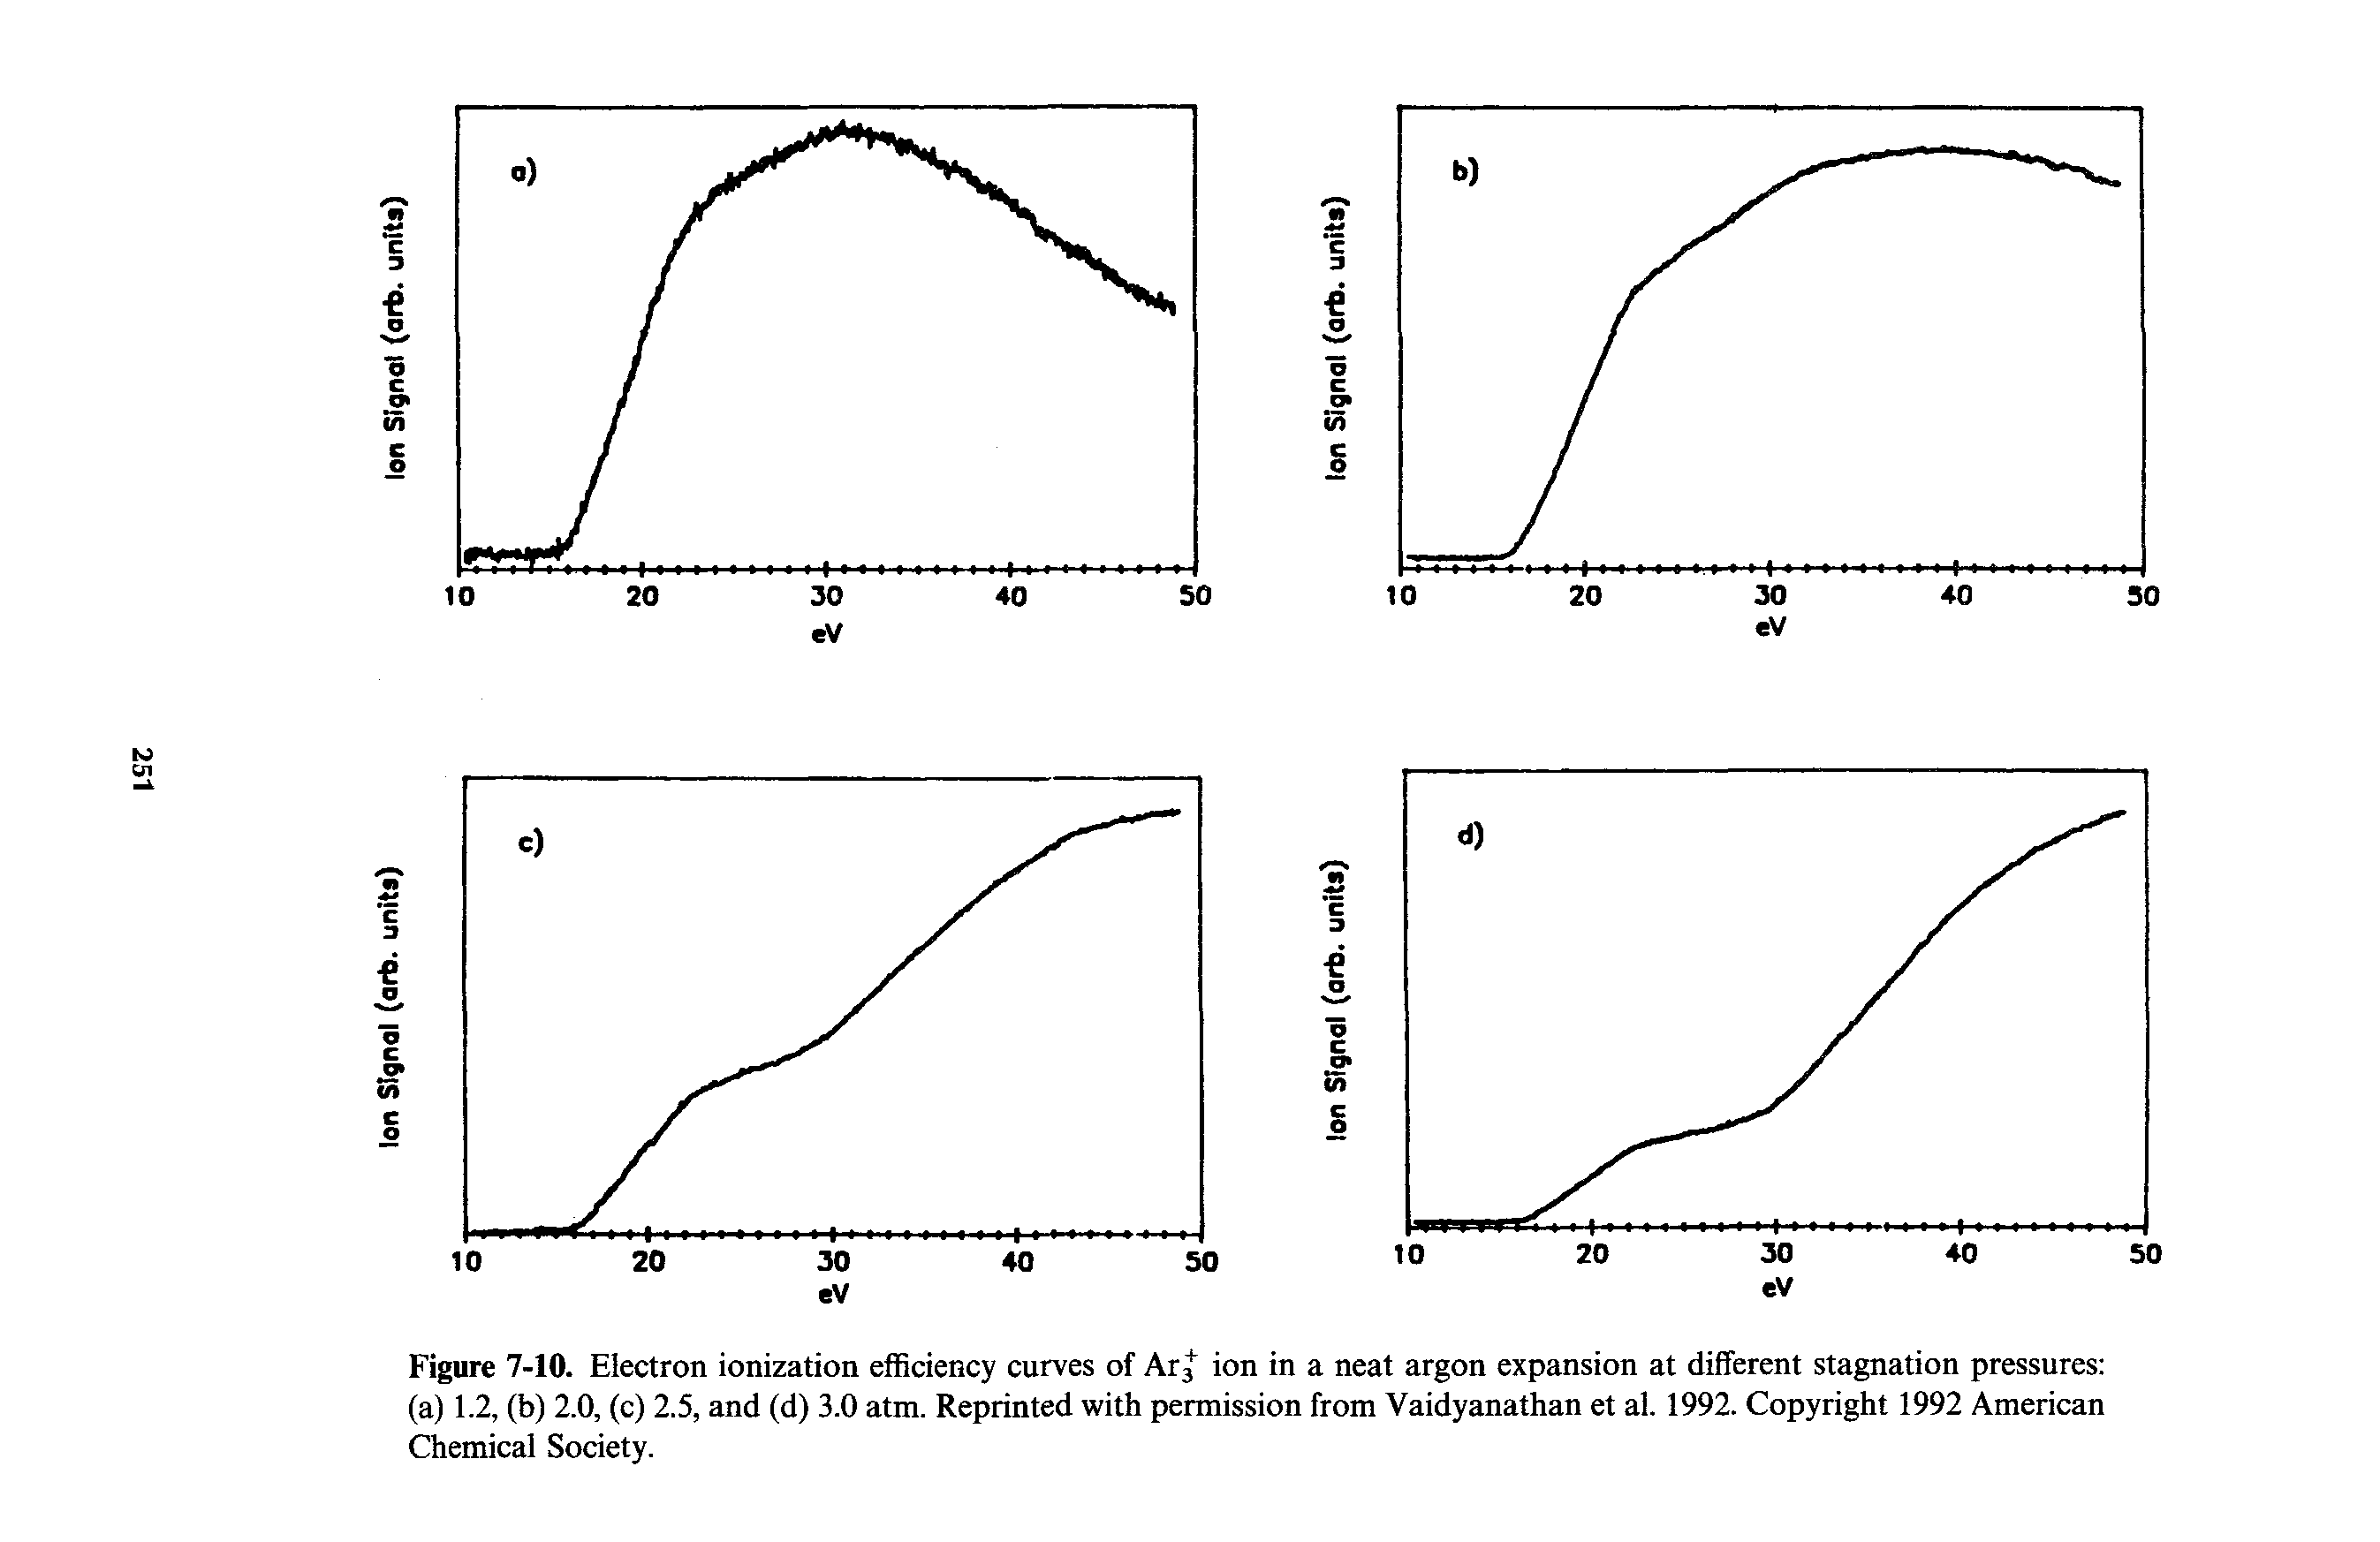 Figure 7-10. Electron ionization efficiency curves of Ar3+ ion in a neat argon expansion at different stagnation pressures (a) 1.2, (b) 2.0, (c) 2.5, and (d) 3.0 atm. Reprinted with permission from Vaidyanathan et al. 1992. Copyright 1992 American Chemical Society.